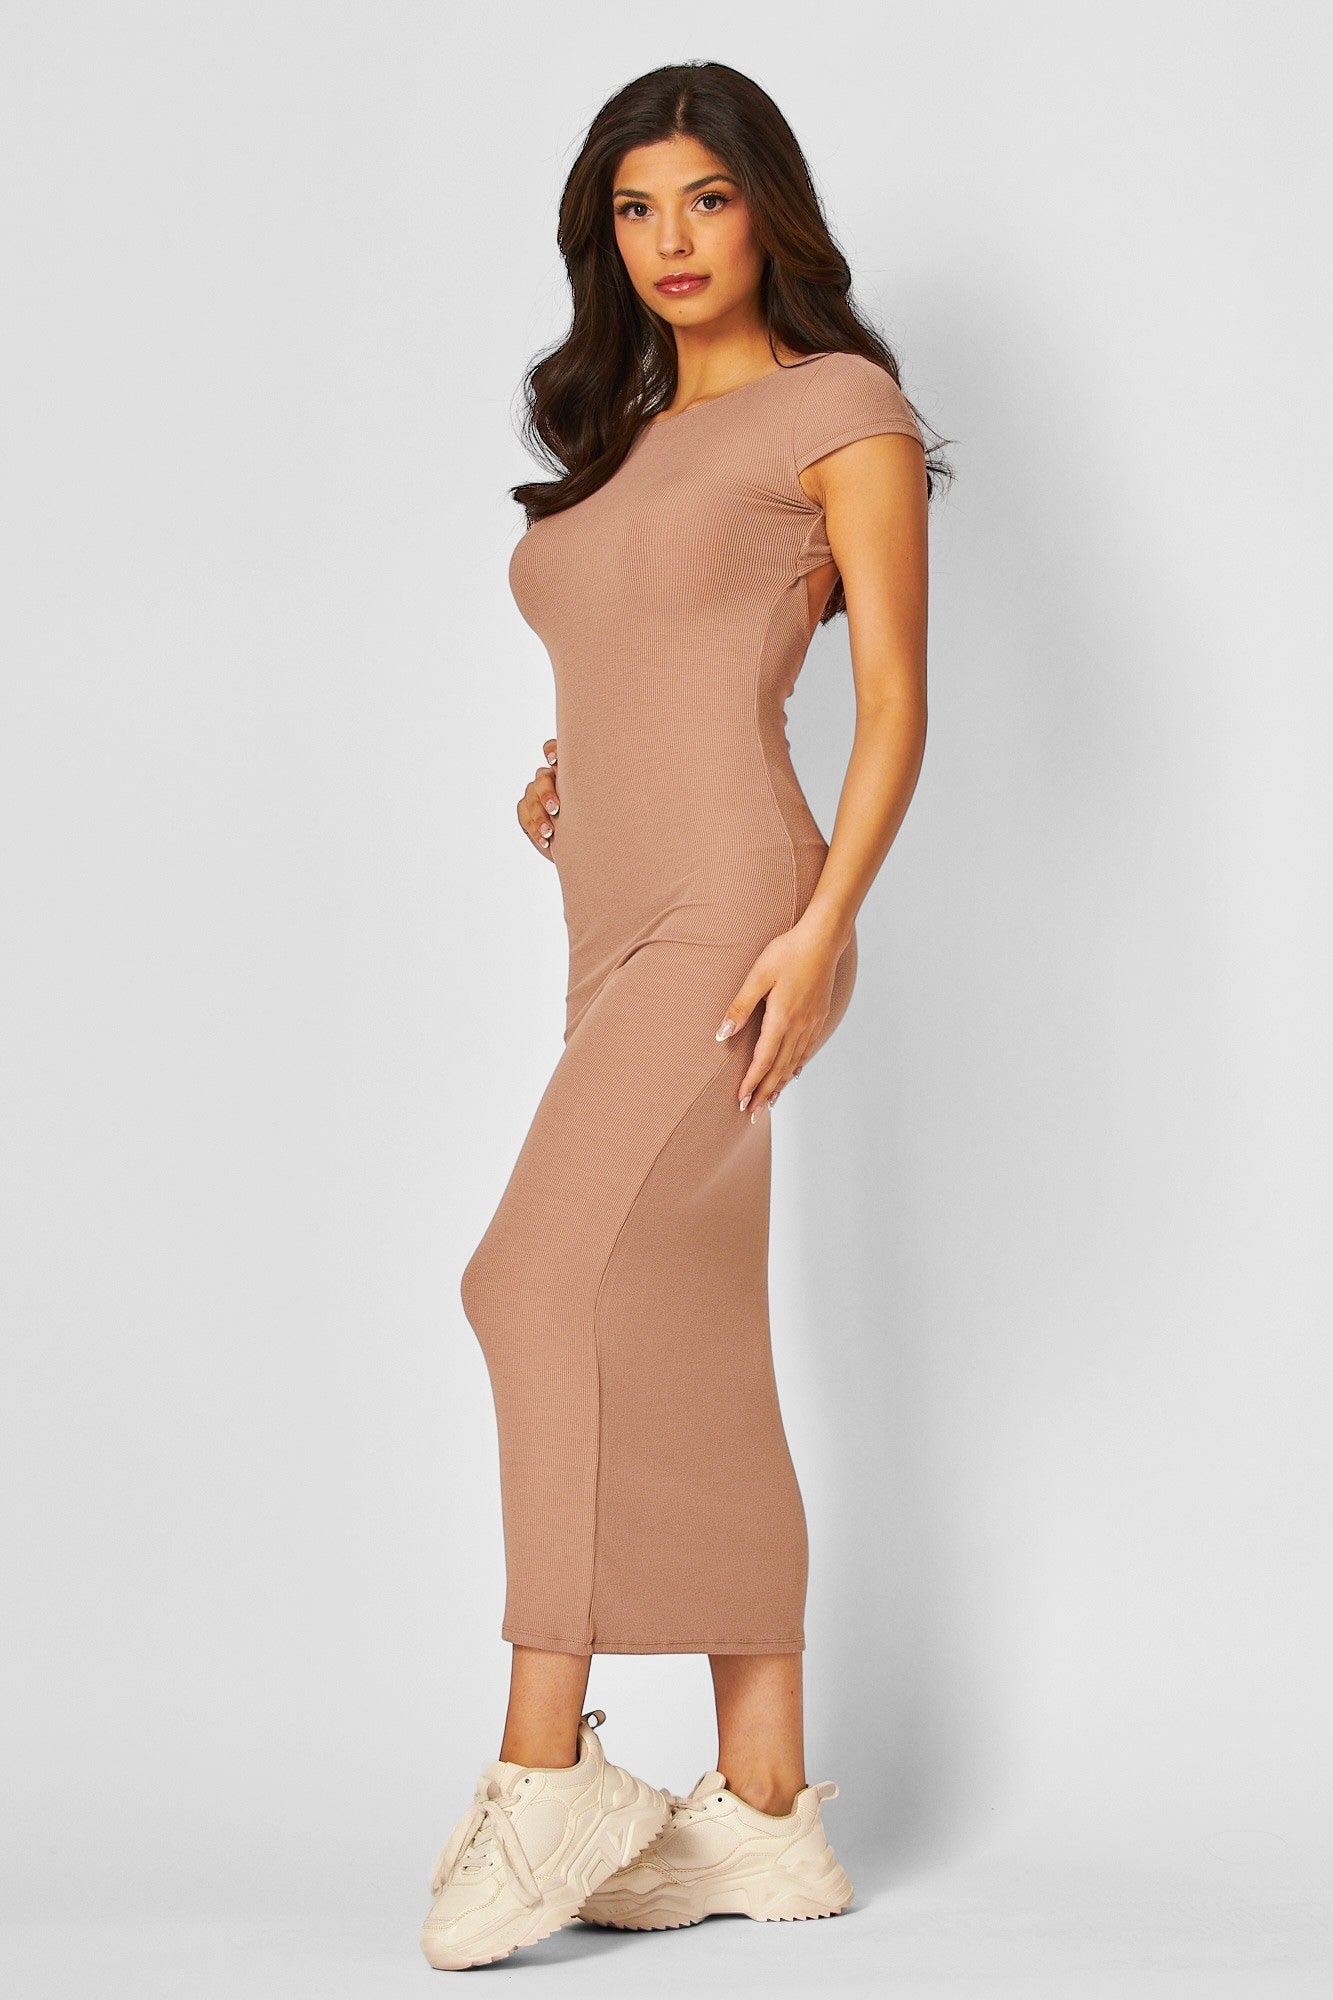 Best of luck ribbed open back maxi dress